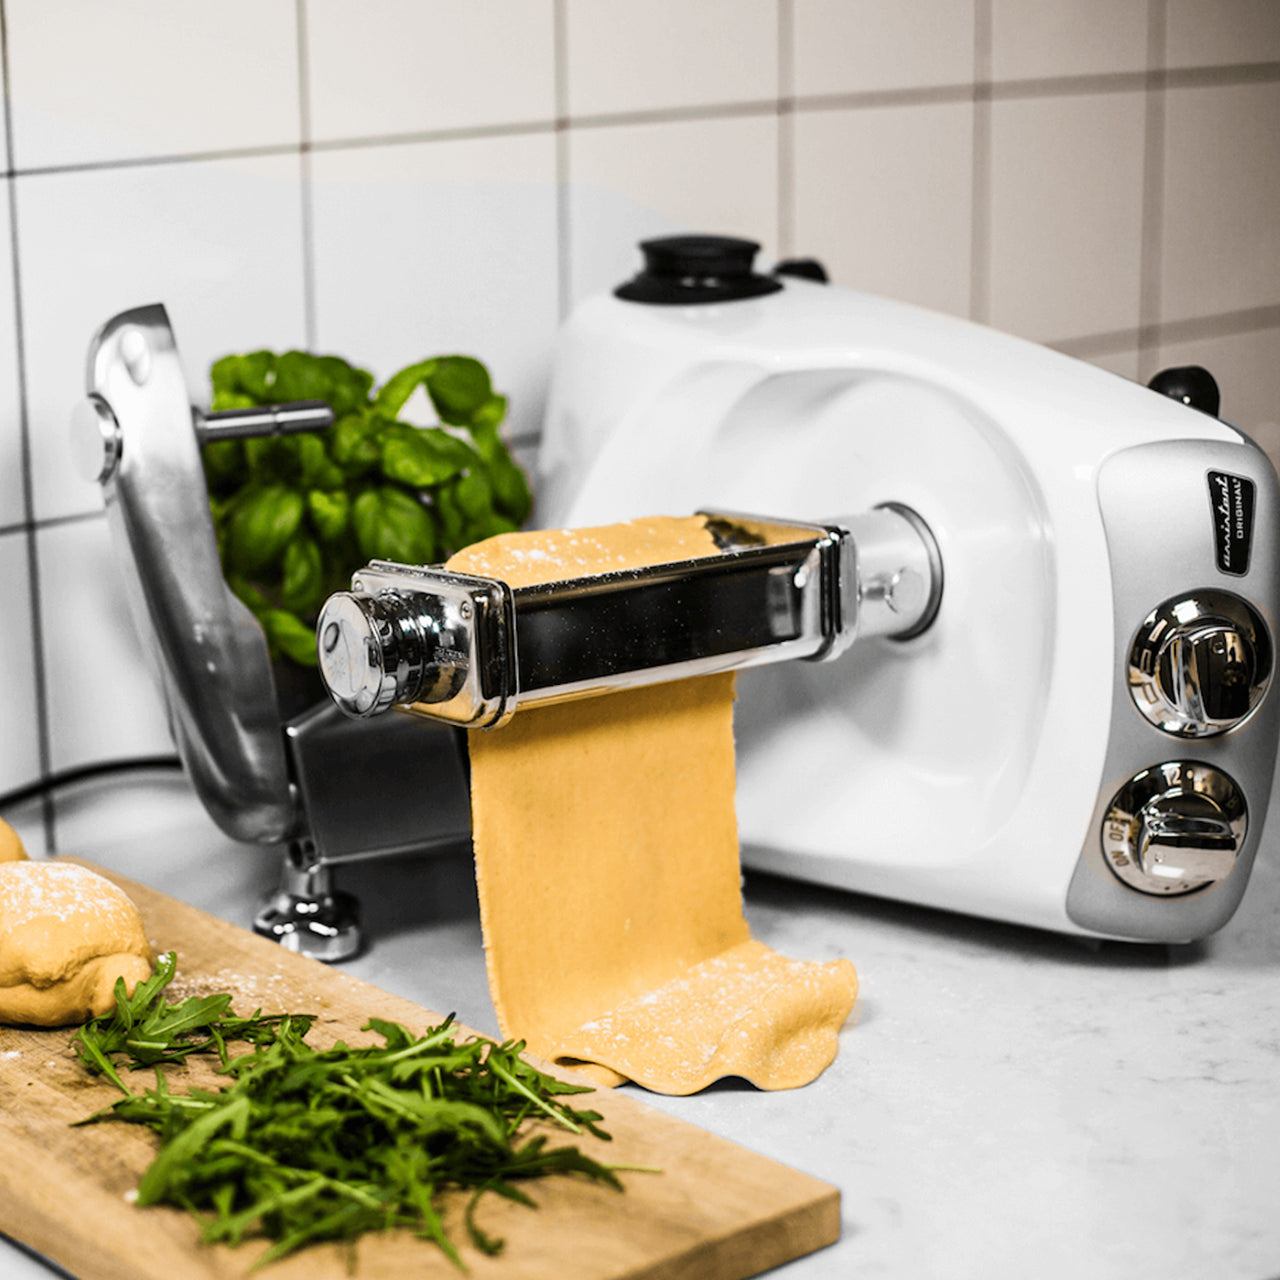 Ankarsrum Adds Lasagnette Pasta Cutter for Stand Mixer